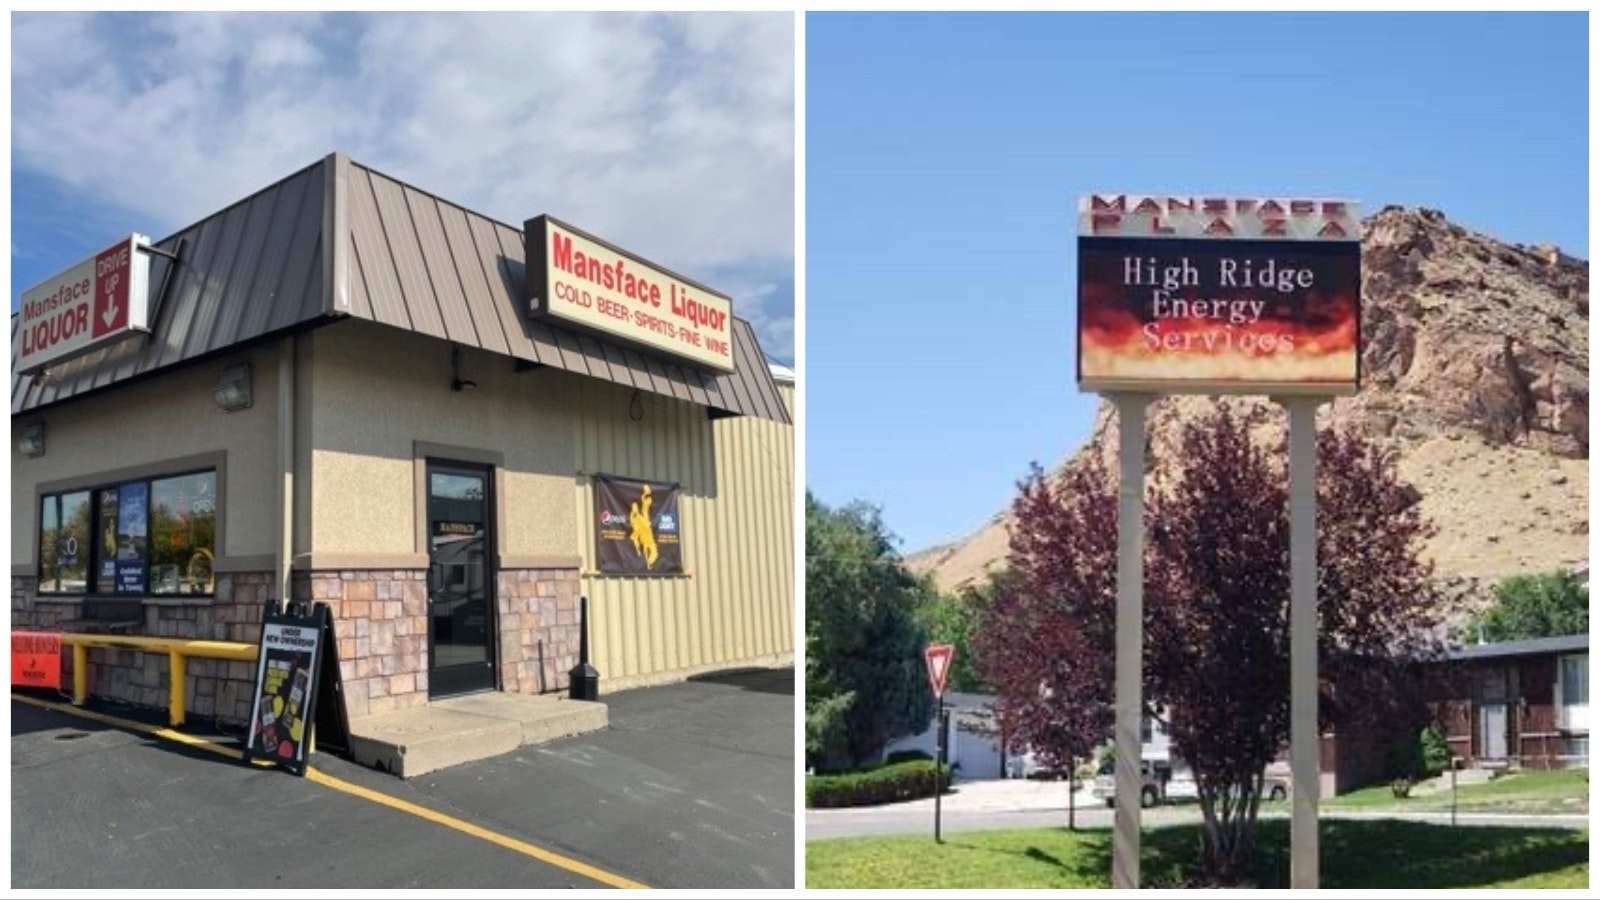 Several businesses around Green River have adopted Mansface into their names.